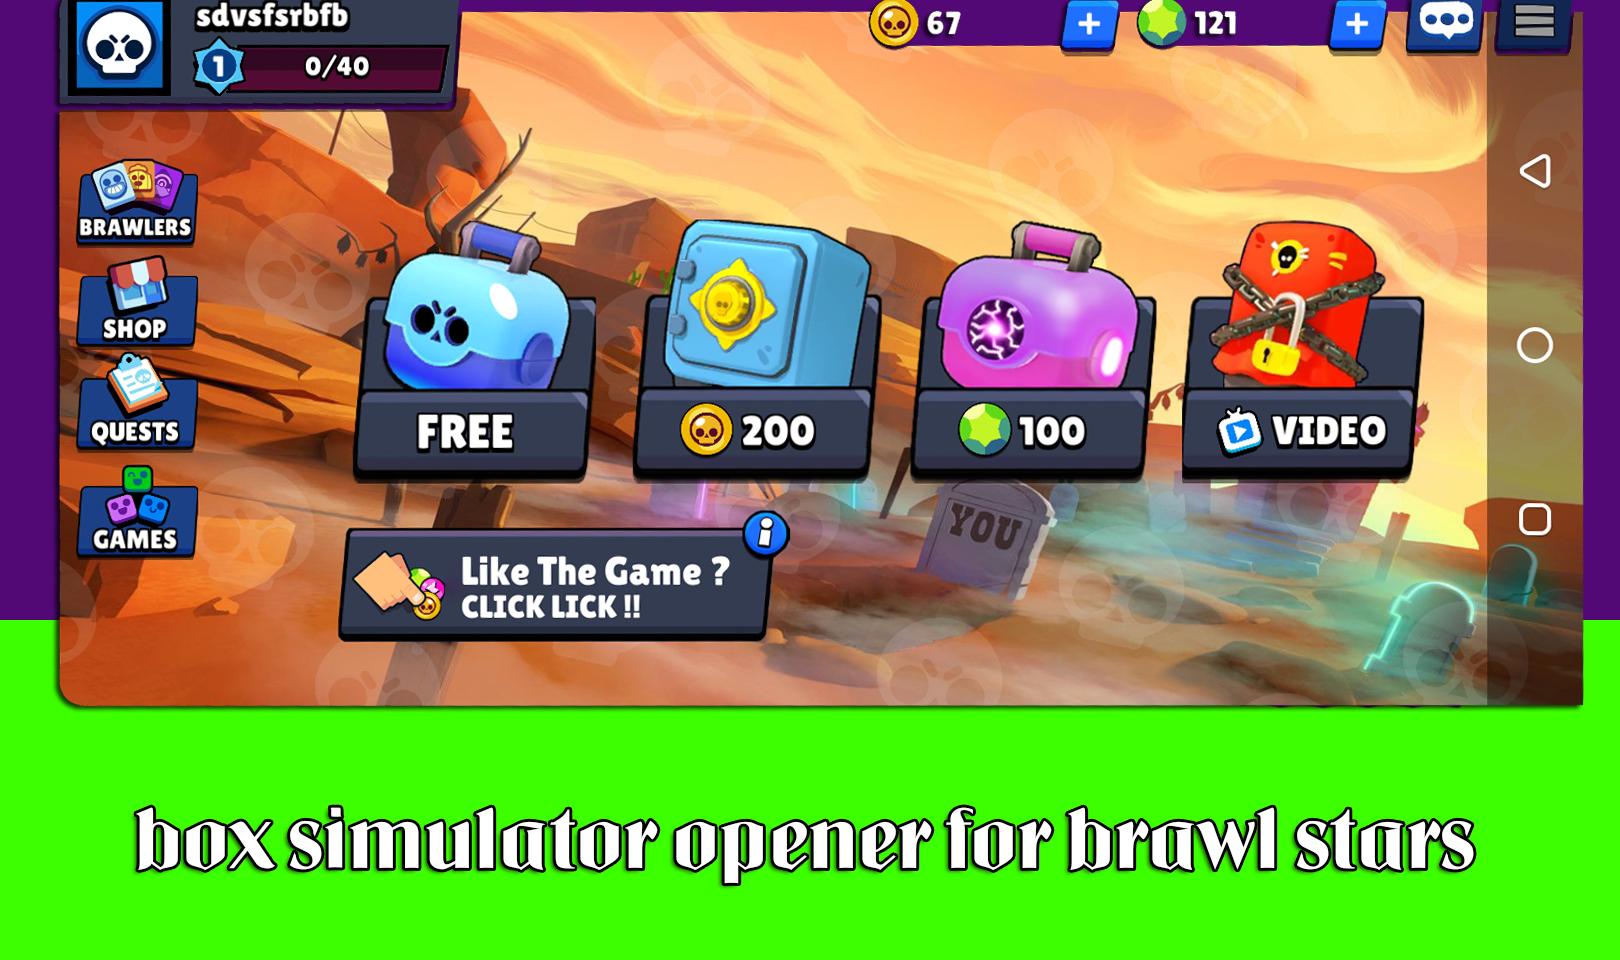 King Box Simulator For Brawl Stars For Android Apk Download - roblox star simulator quests